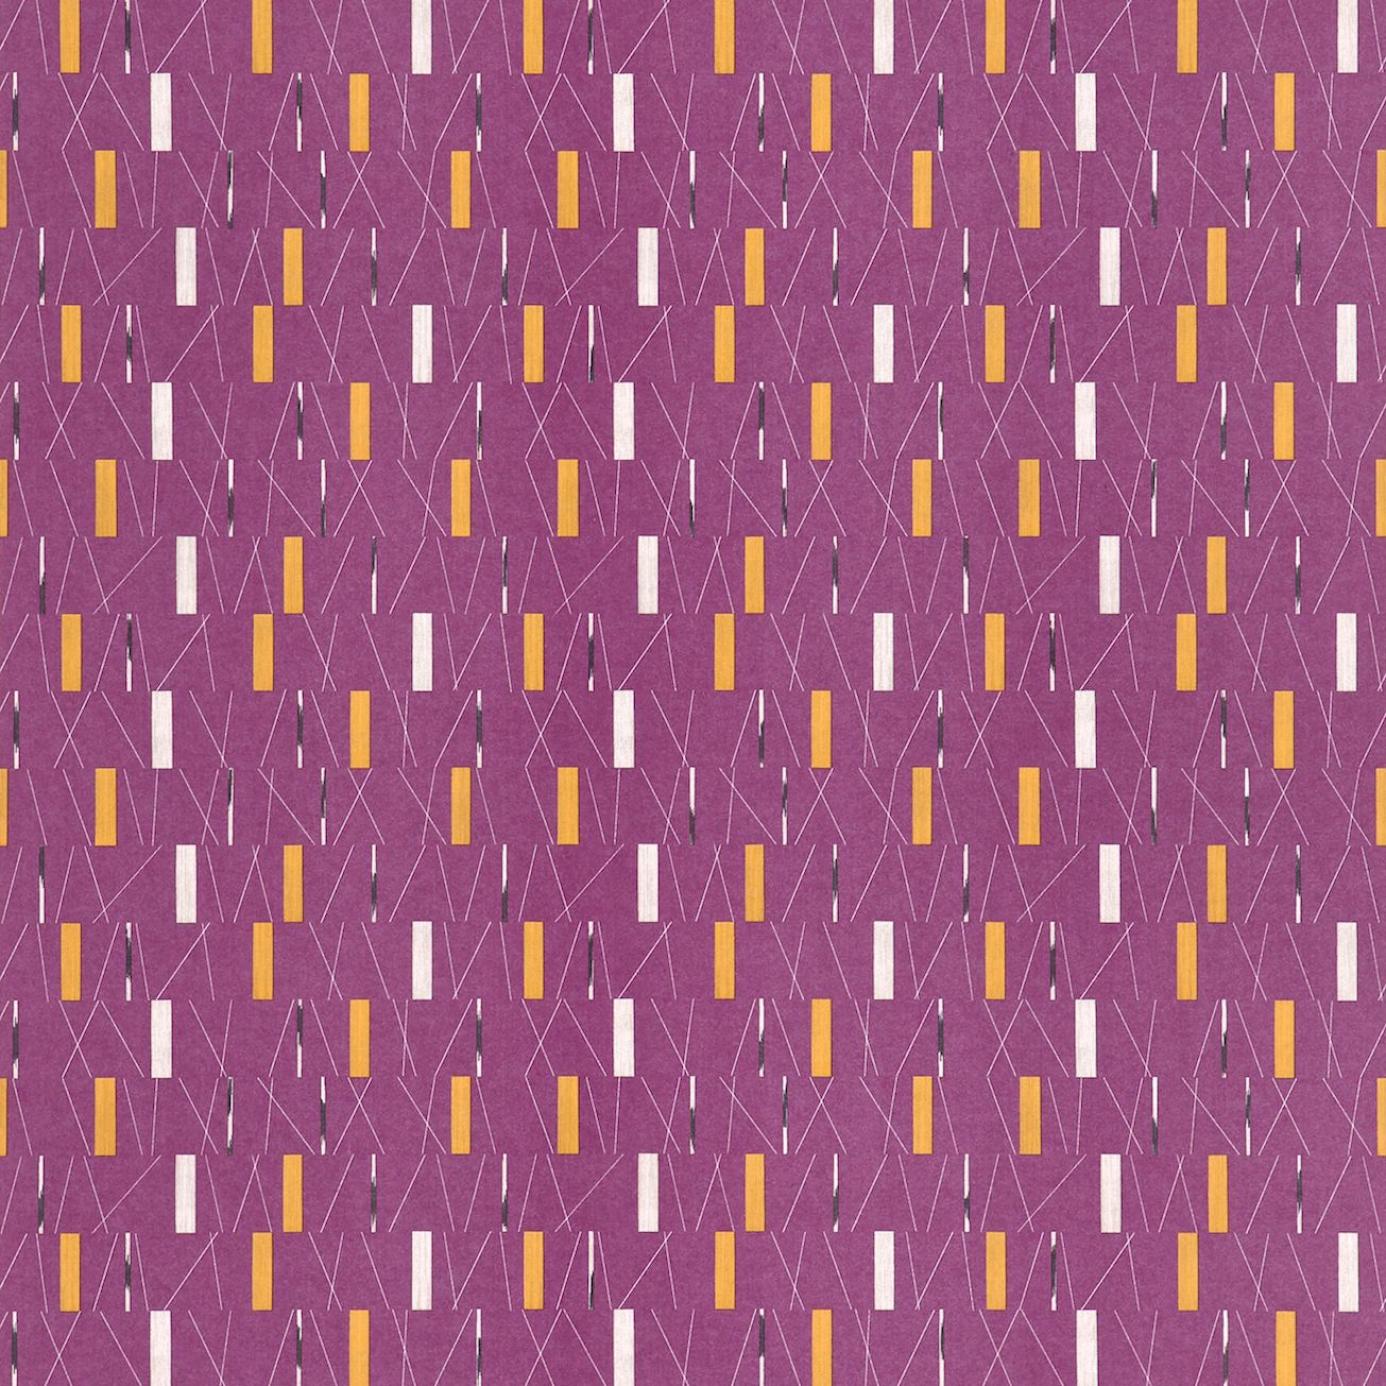 Wallpaper Patterns 50s Background 40s